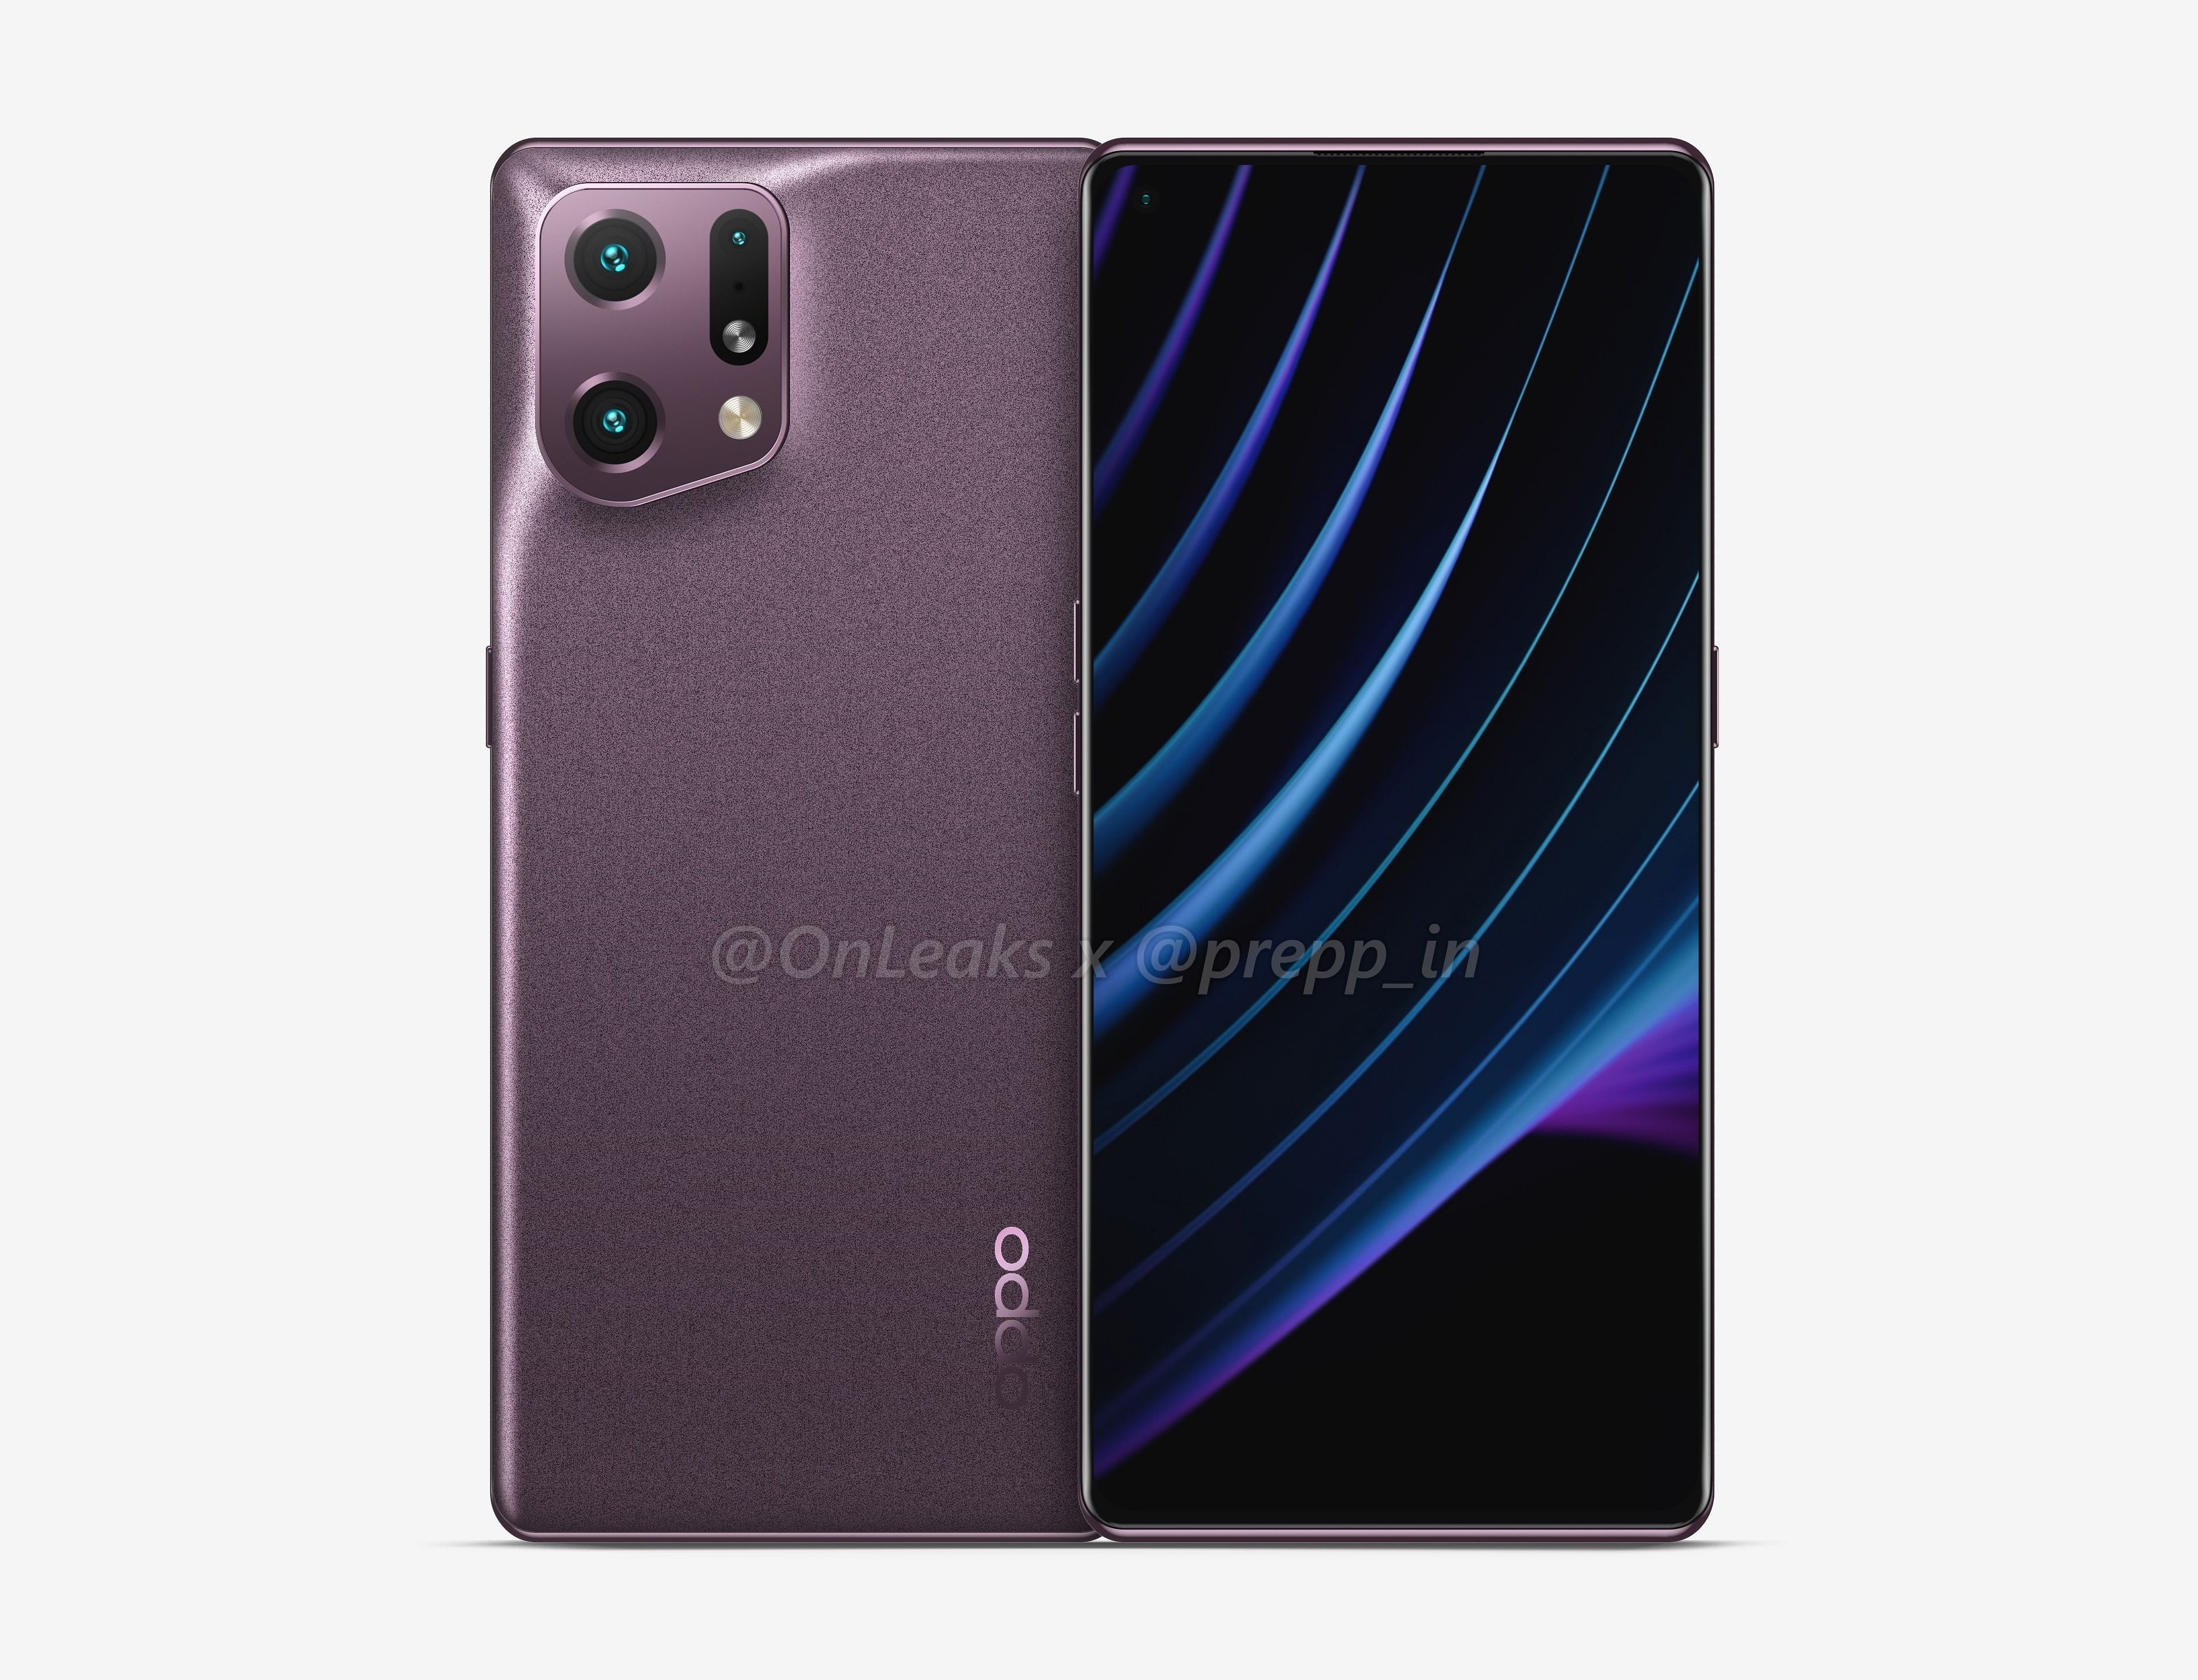 120Hz QHD+ AMOLED display, Snapdragon 8 Gen 1 chip, 50MP triple camera: OPPO Find X5 Pro specs revealed